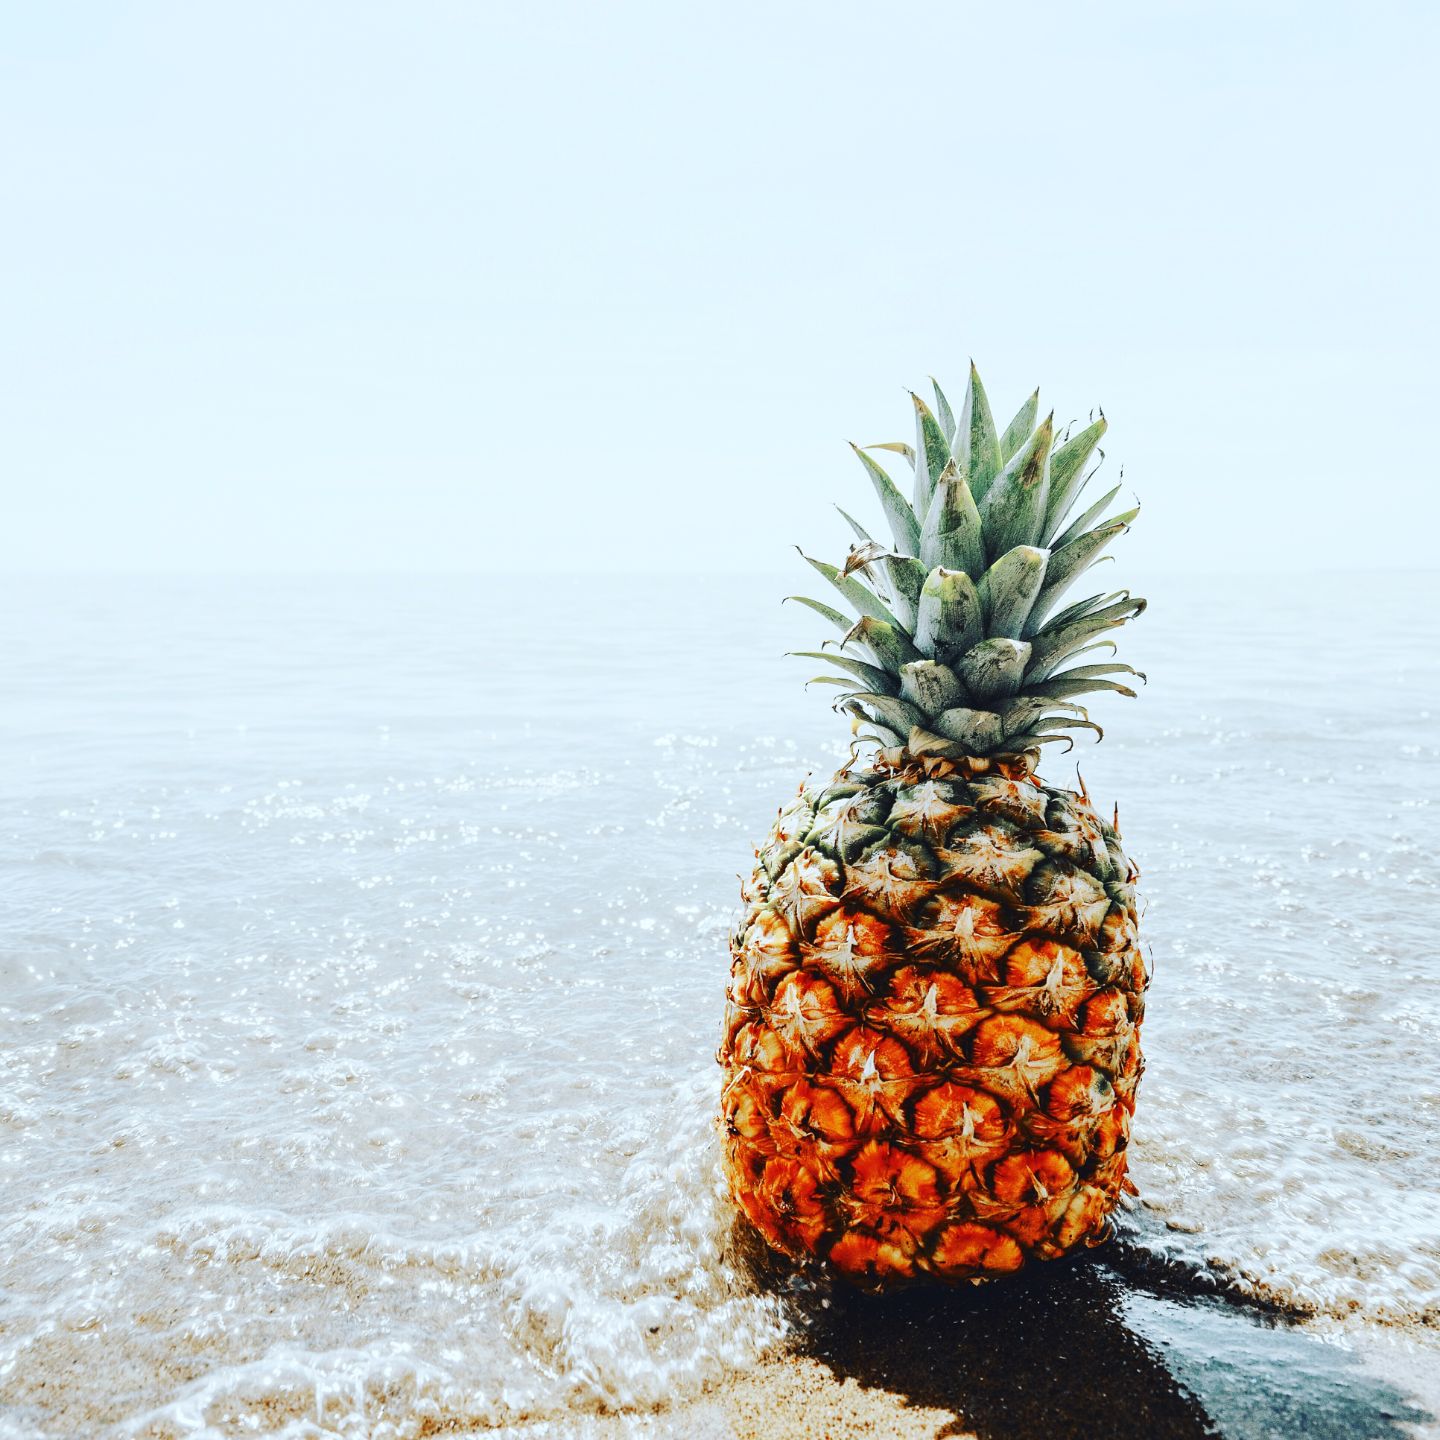 Pineapple Supply Co. | Pineapple shop on a mission to spread good vibes